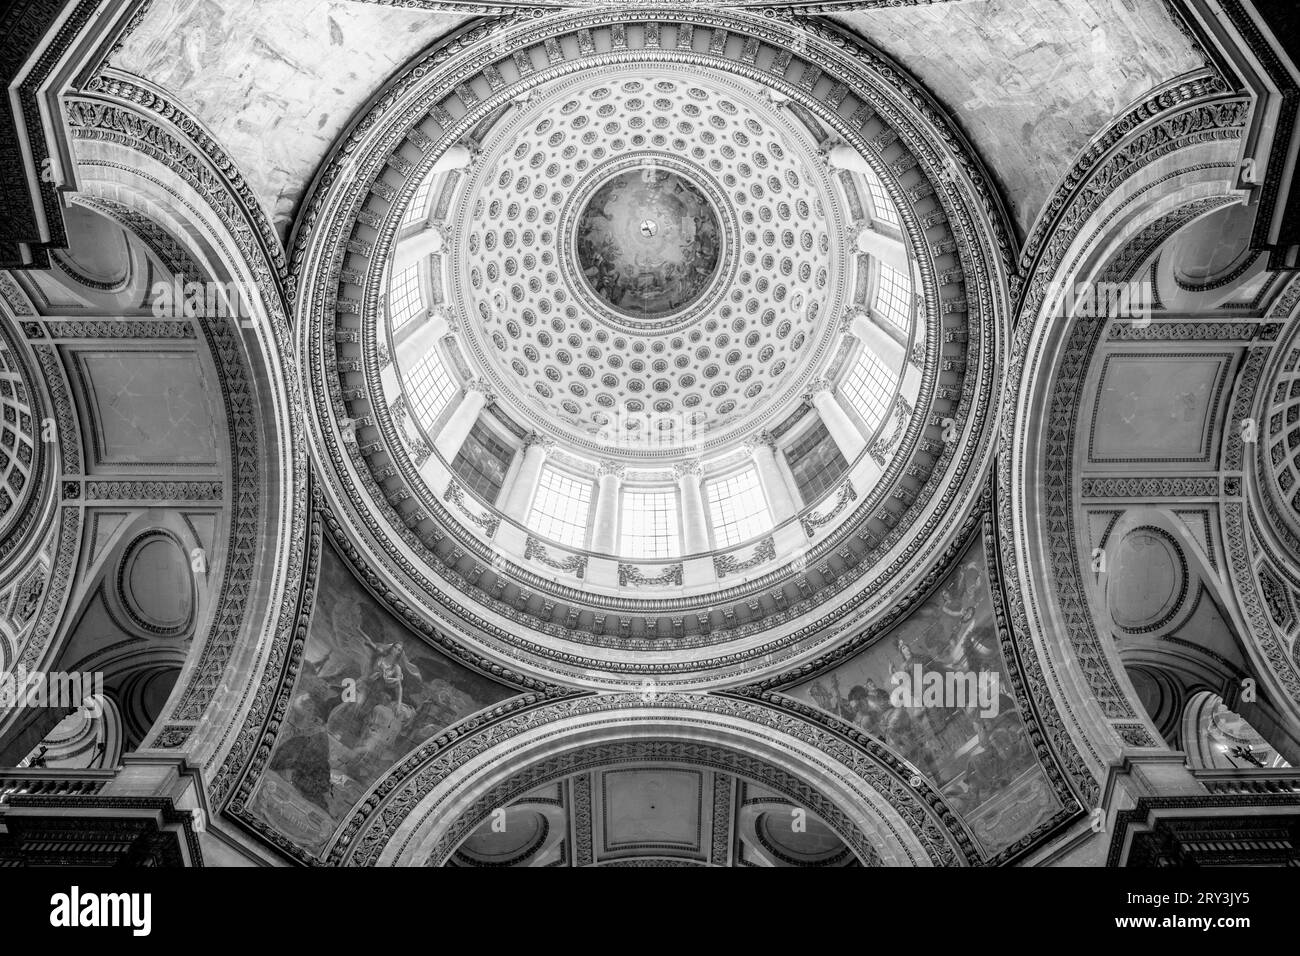 Ornamental and painted ceiling of Pantheon in Paris, France. Black and white photography. Stock Photo